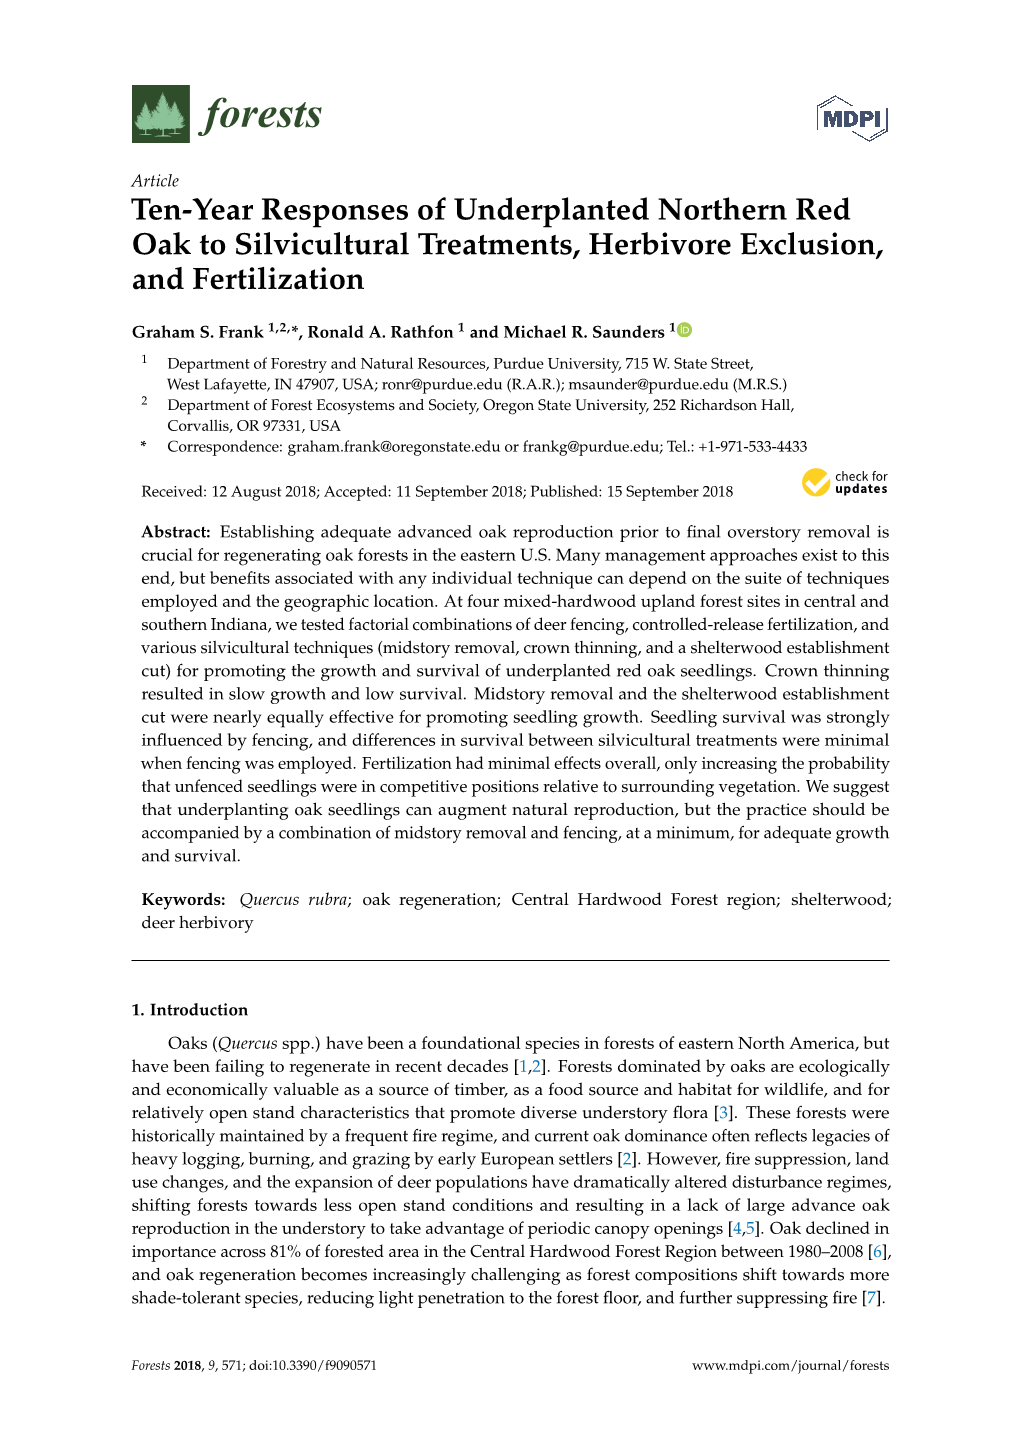 Ten-Year Responses of Underplanted Northern Red Oak to Silvicultural Treatments, Herbivore Exclusion, and Fertilization